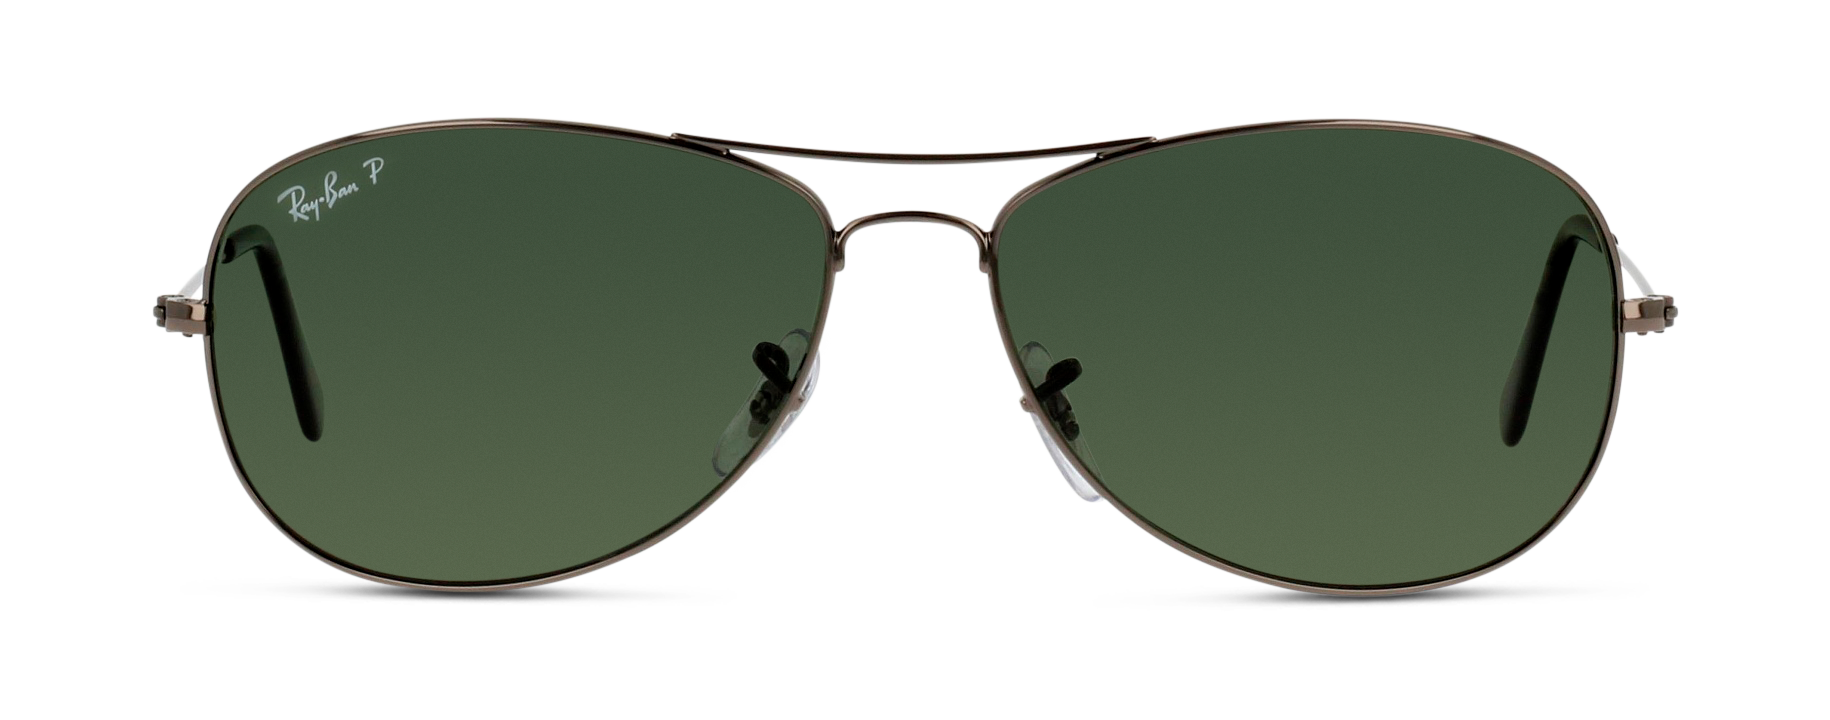 [products.image.front] Ray-Ban Cockpit RB3362 004/58